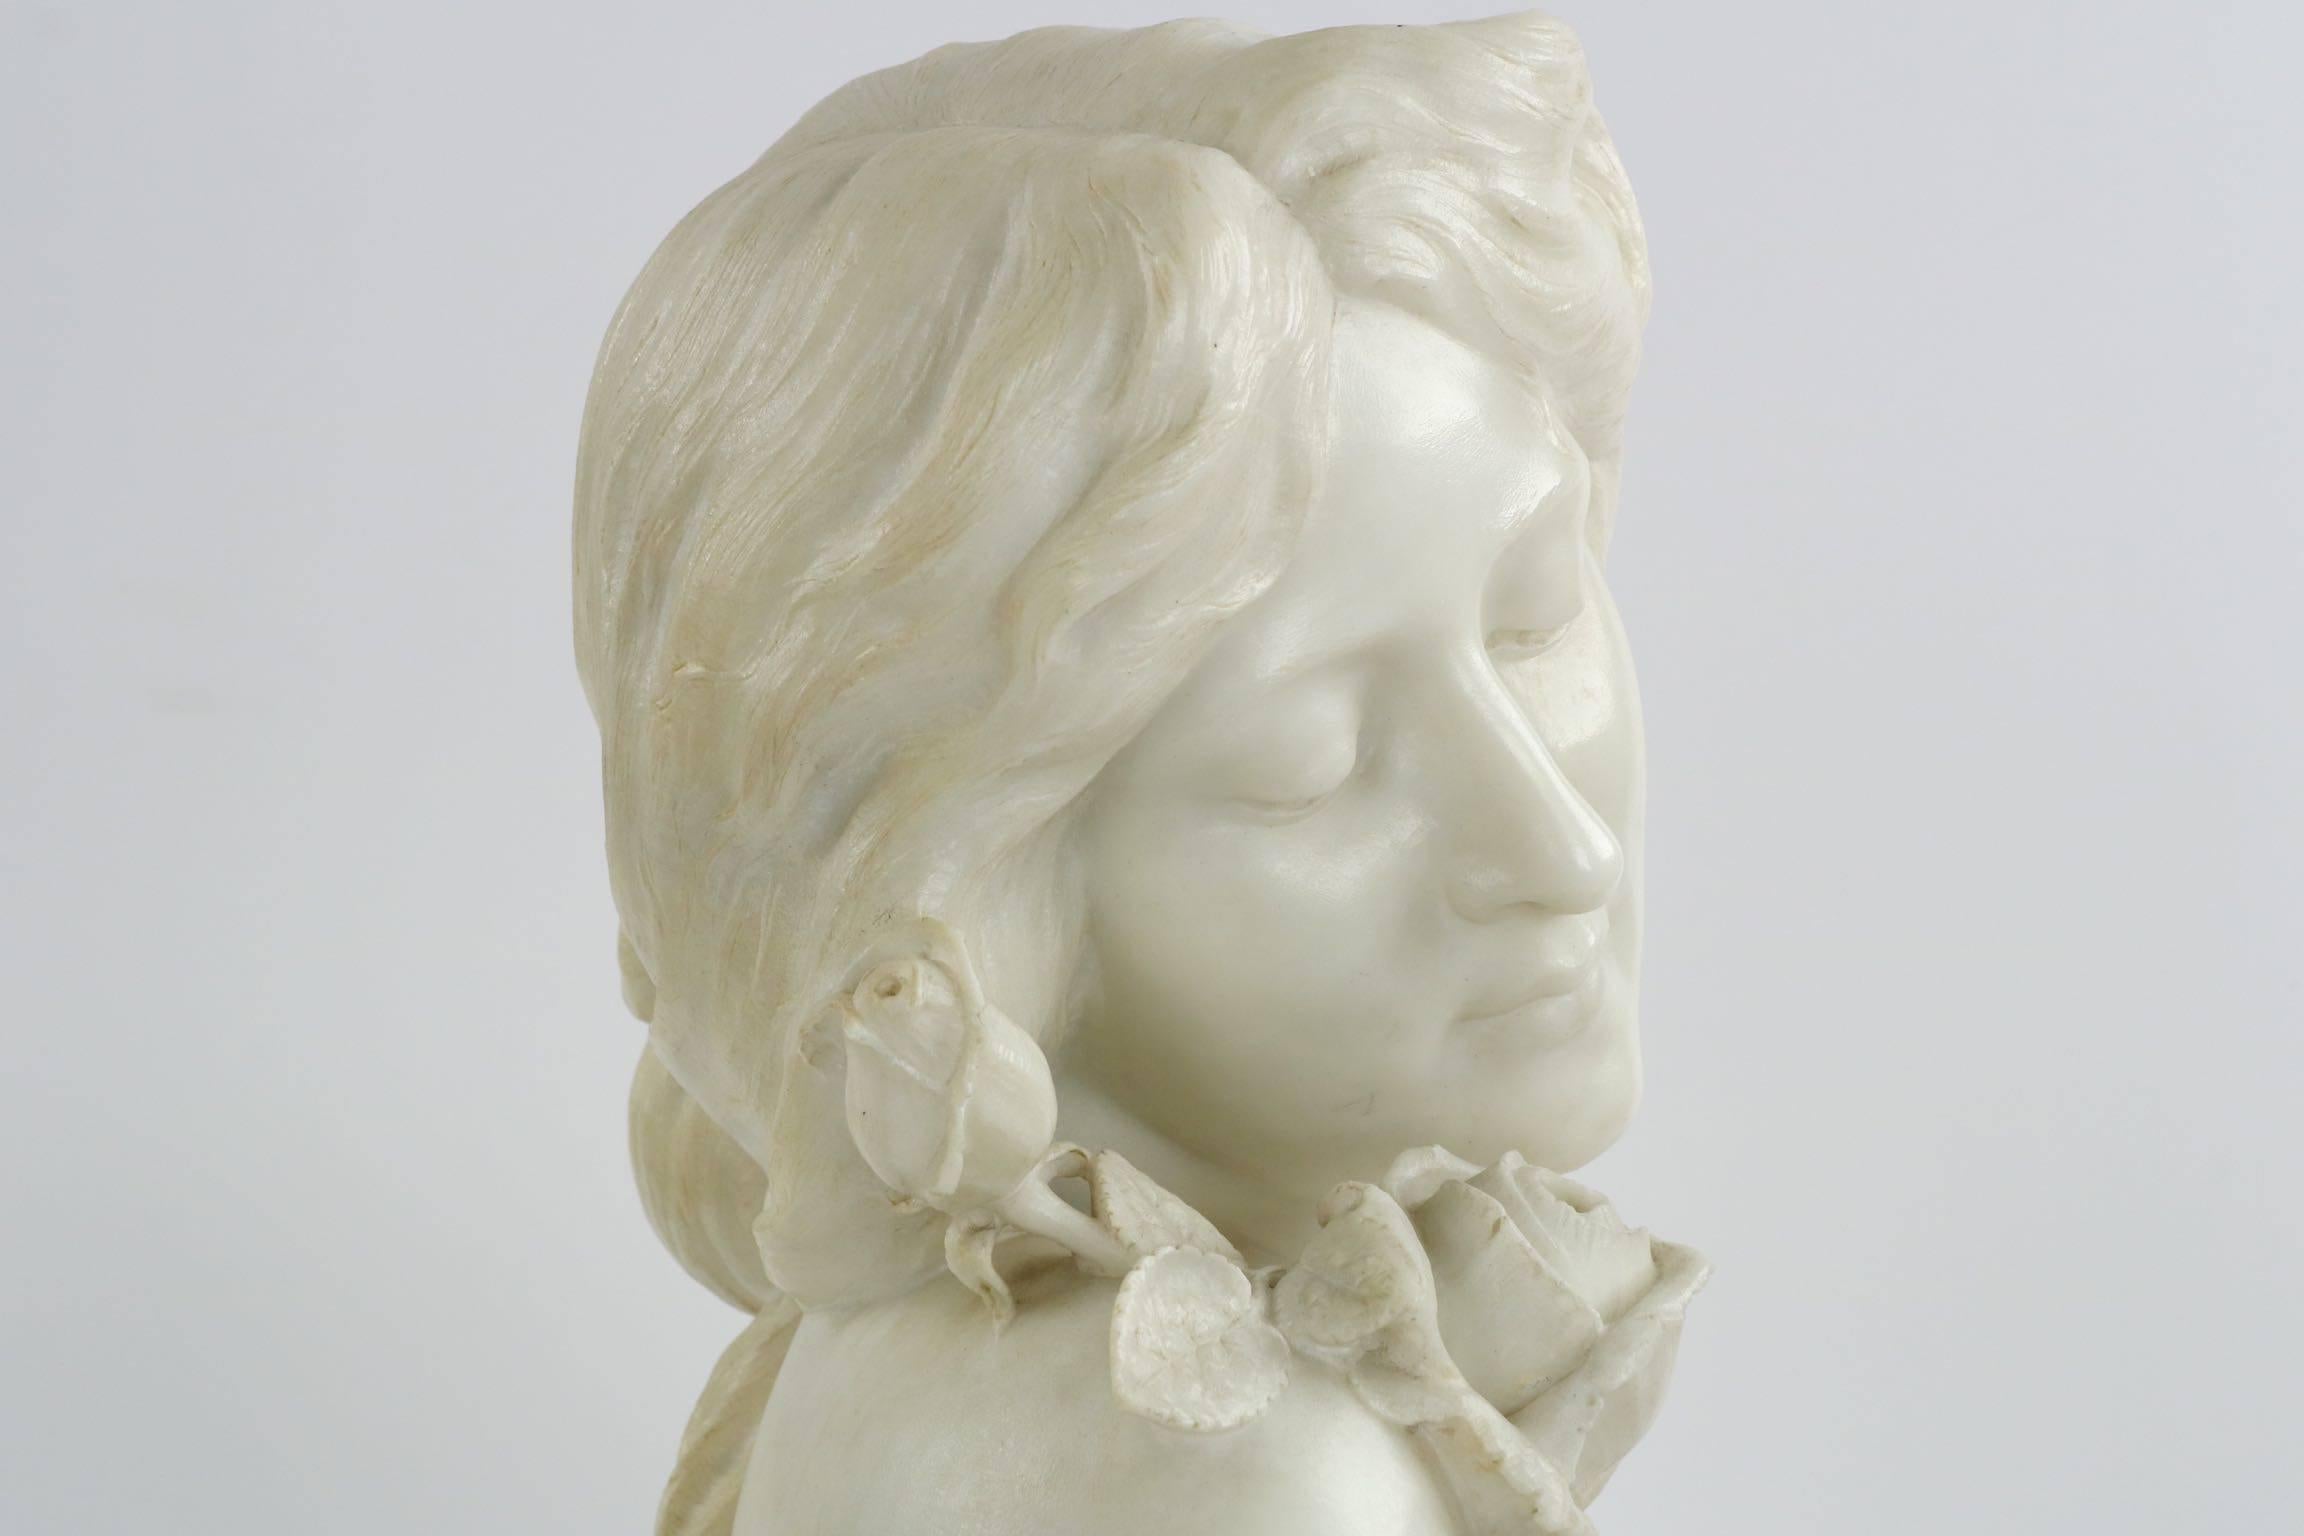 19th Century Fine Italian Antique Marble Sculpture Bust of a Young Woman Signed A. Testi